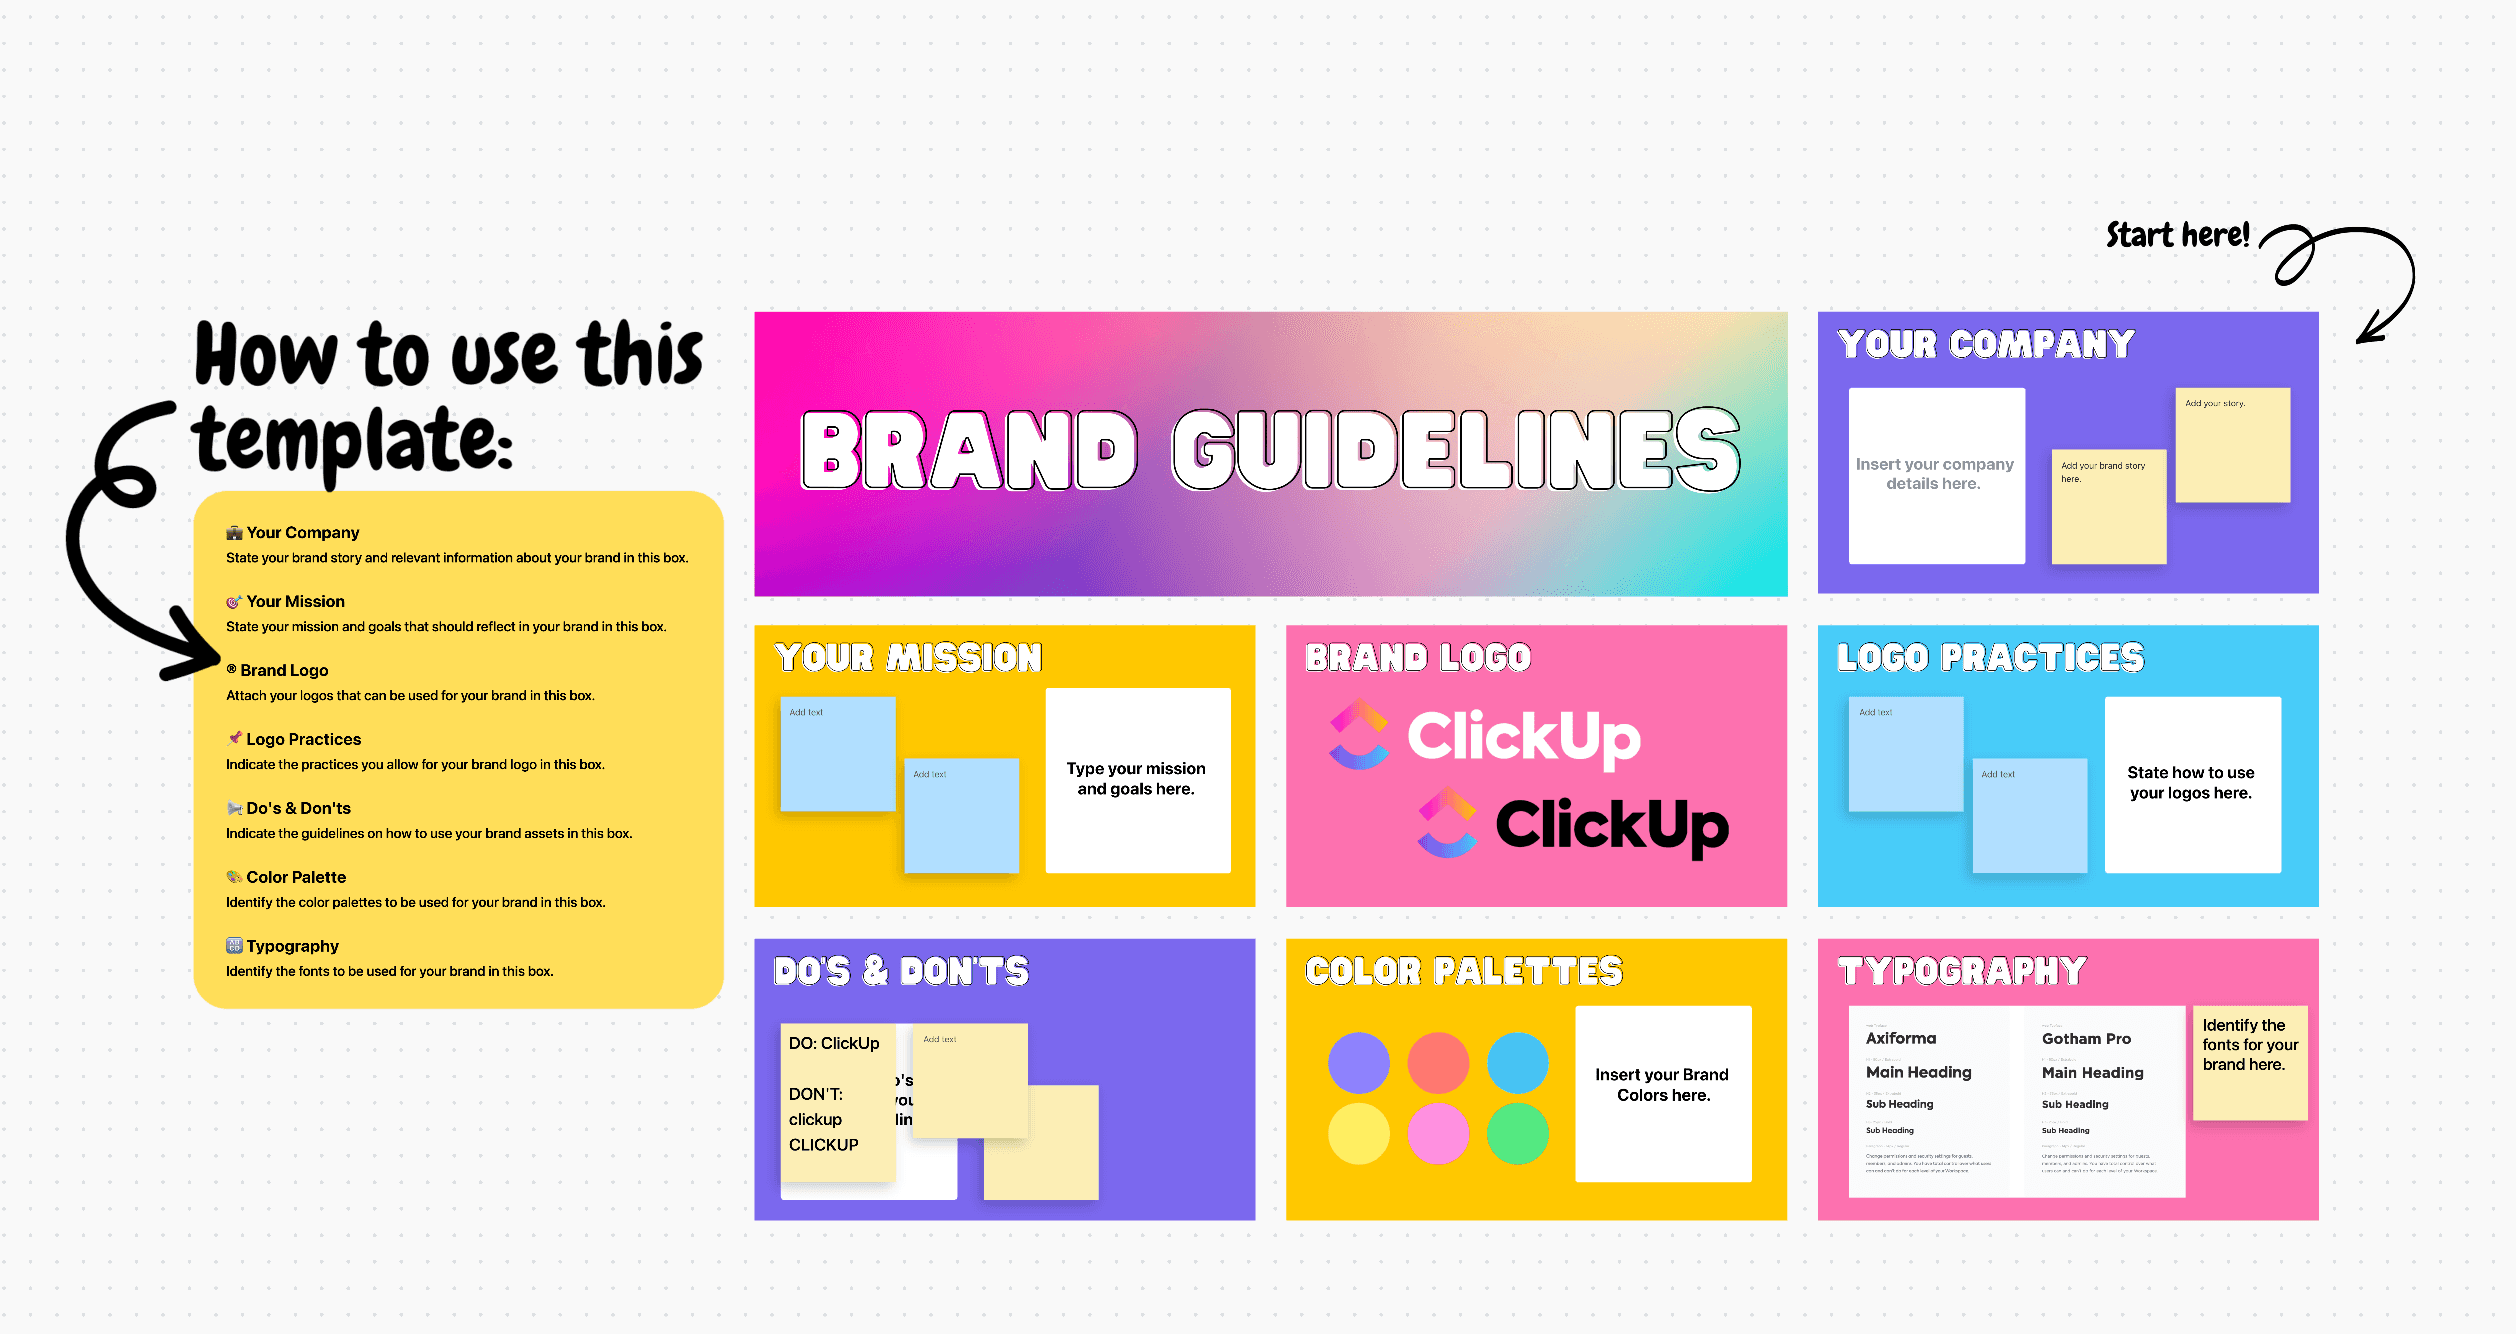 Need help creating your Brand Book from scratch? This ClickUp Brand Guidelines template is filled with every Brand Book element ready for you to complete and make your own.